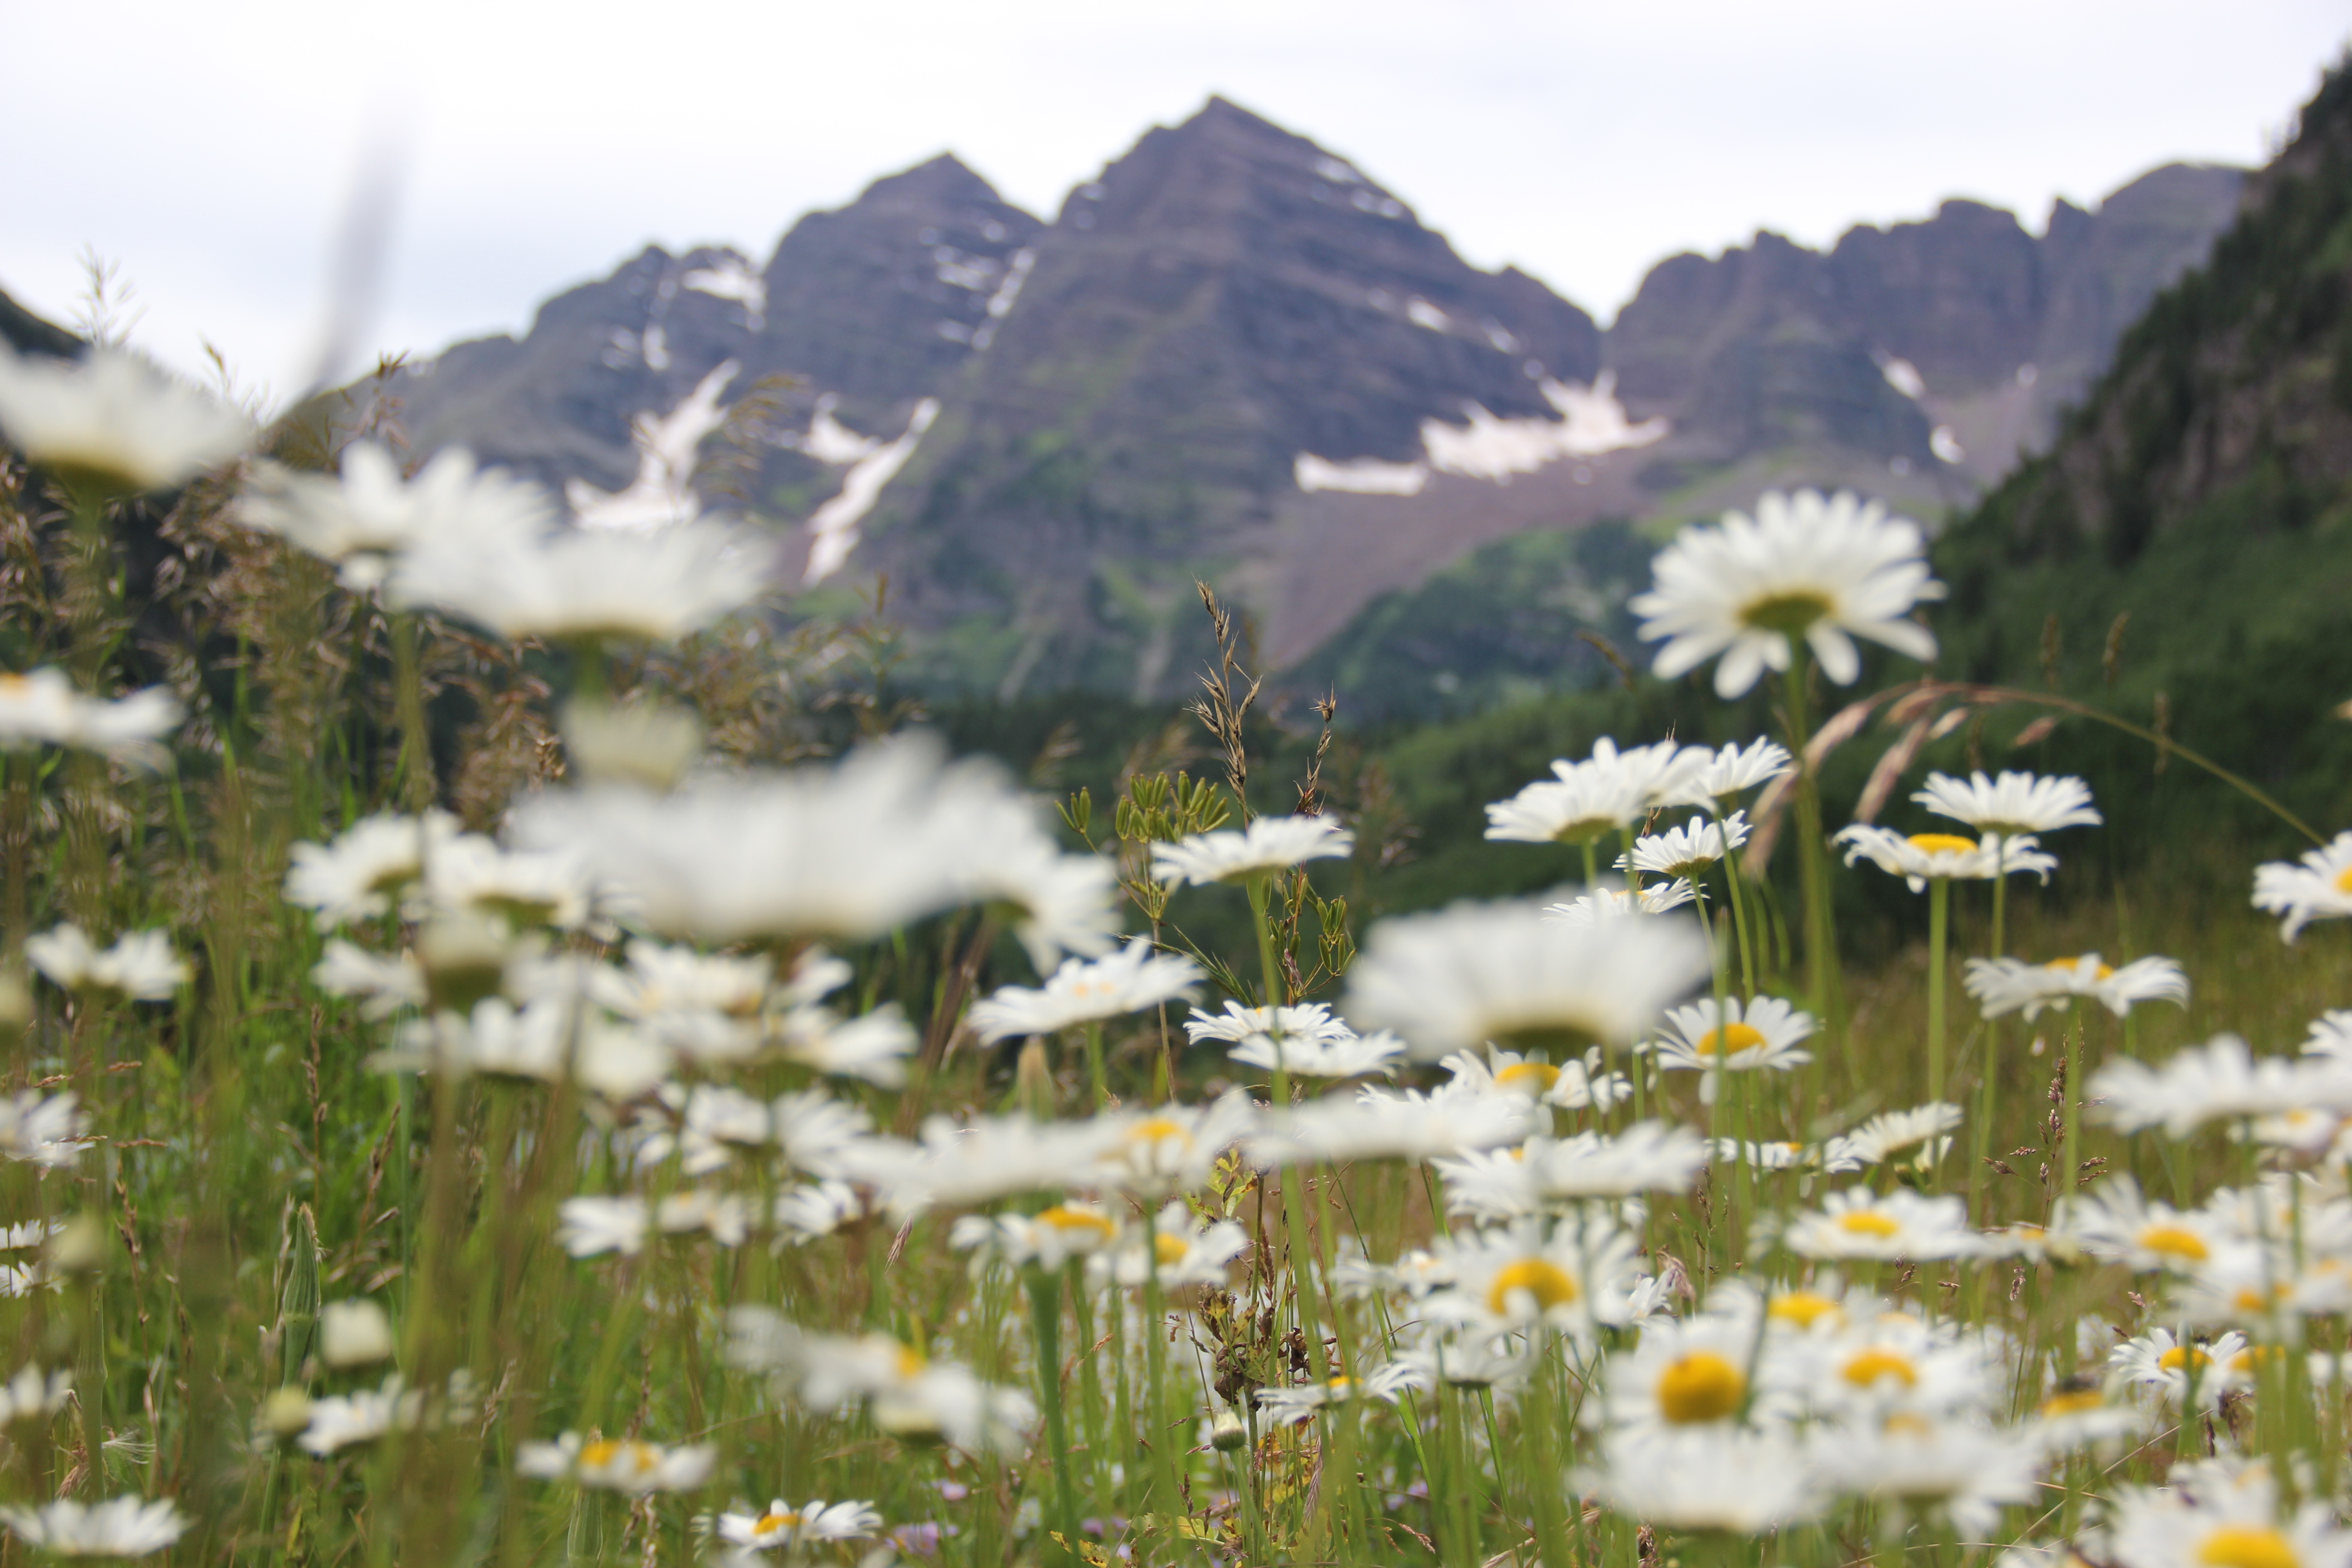 Colorado wildflowers with a view of the Maroon Bells.